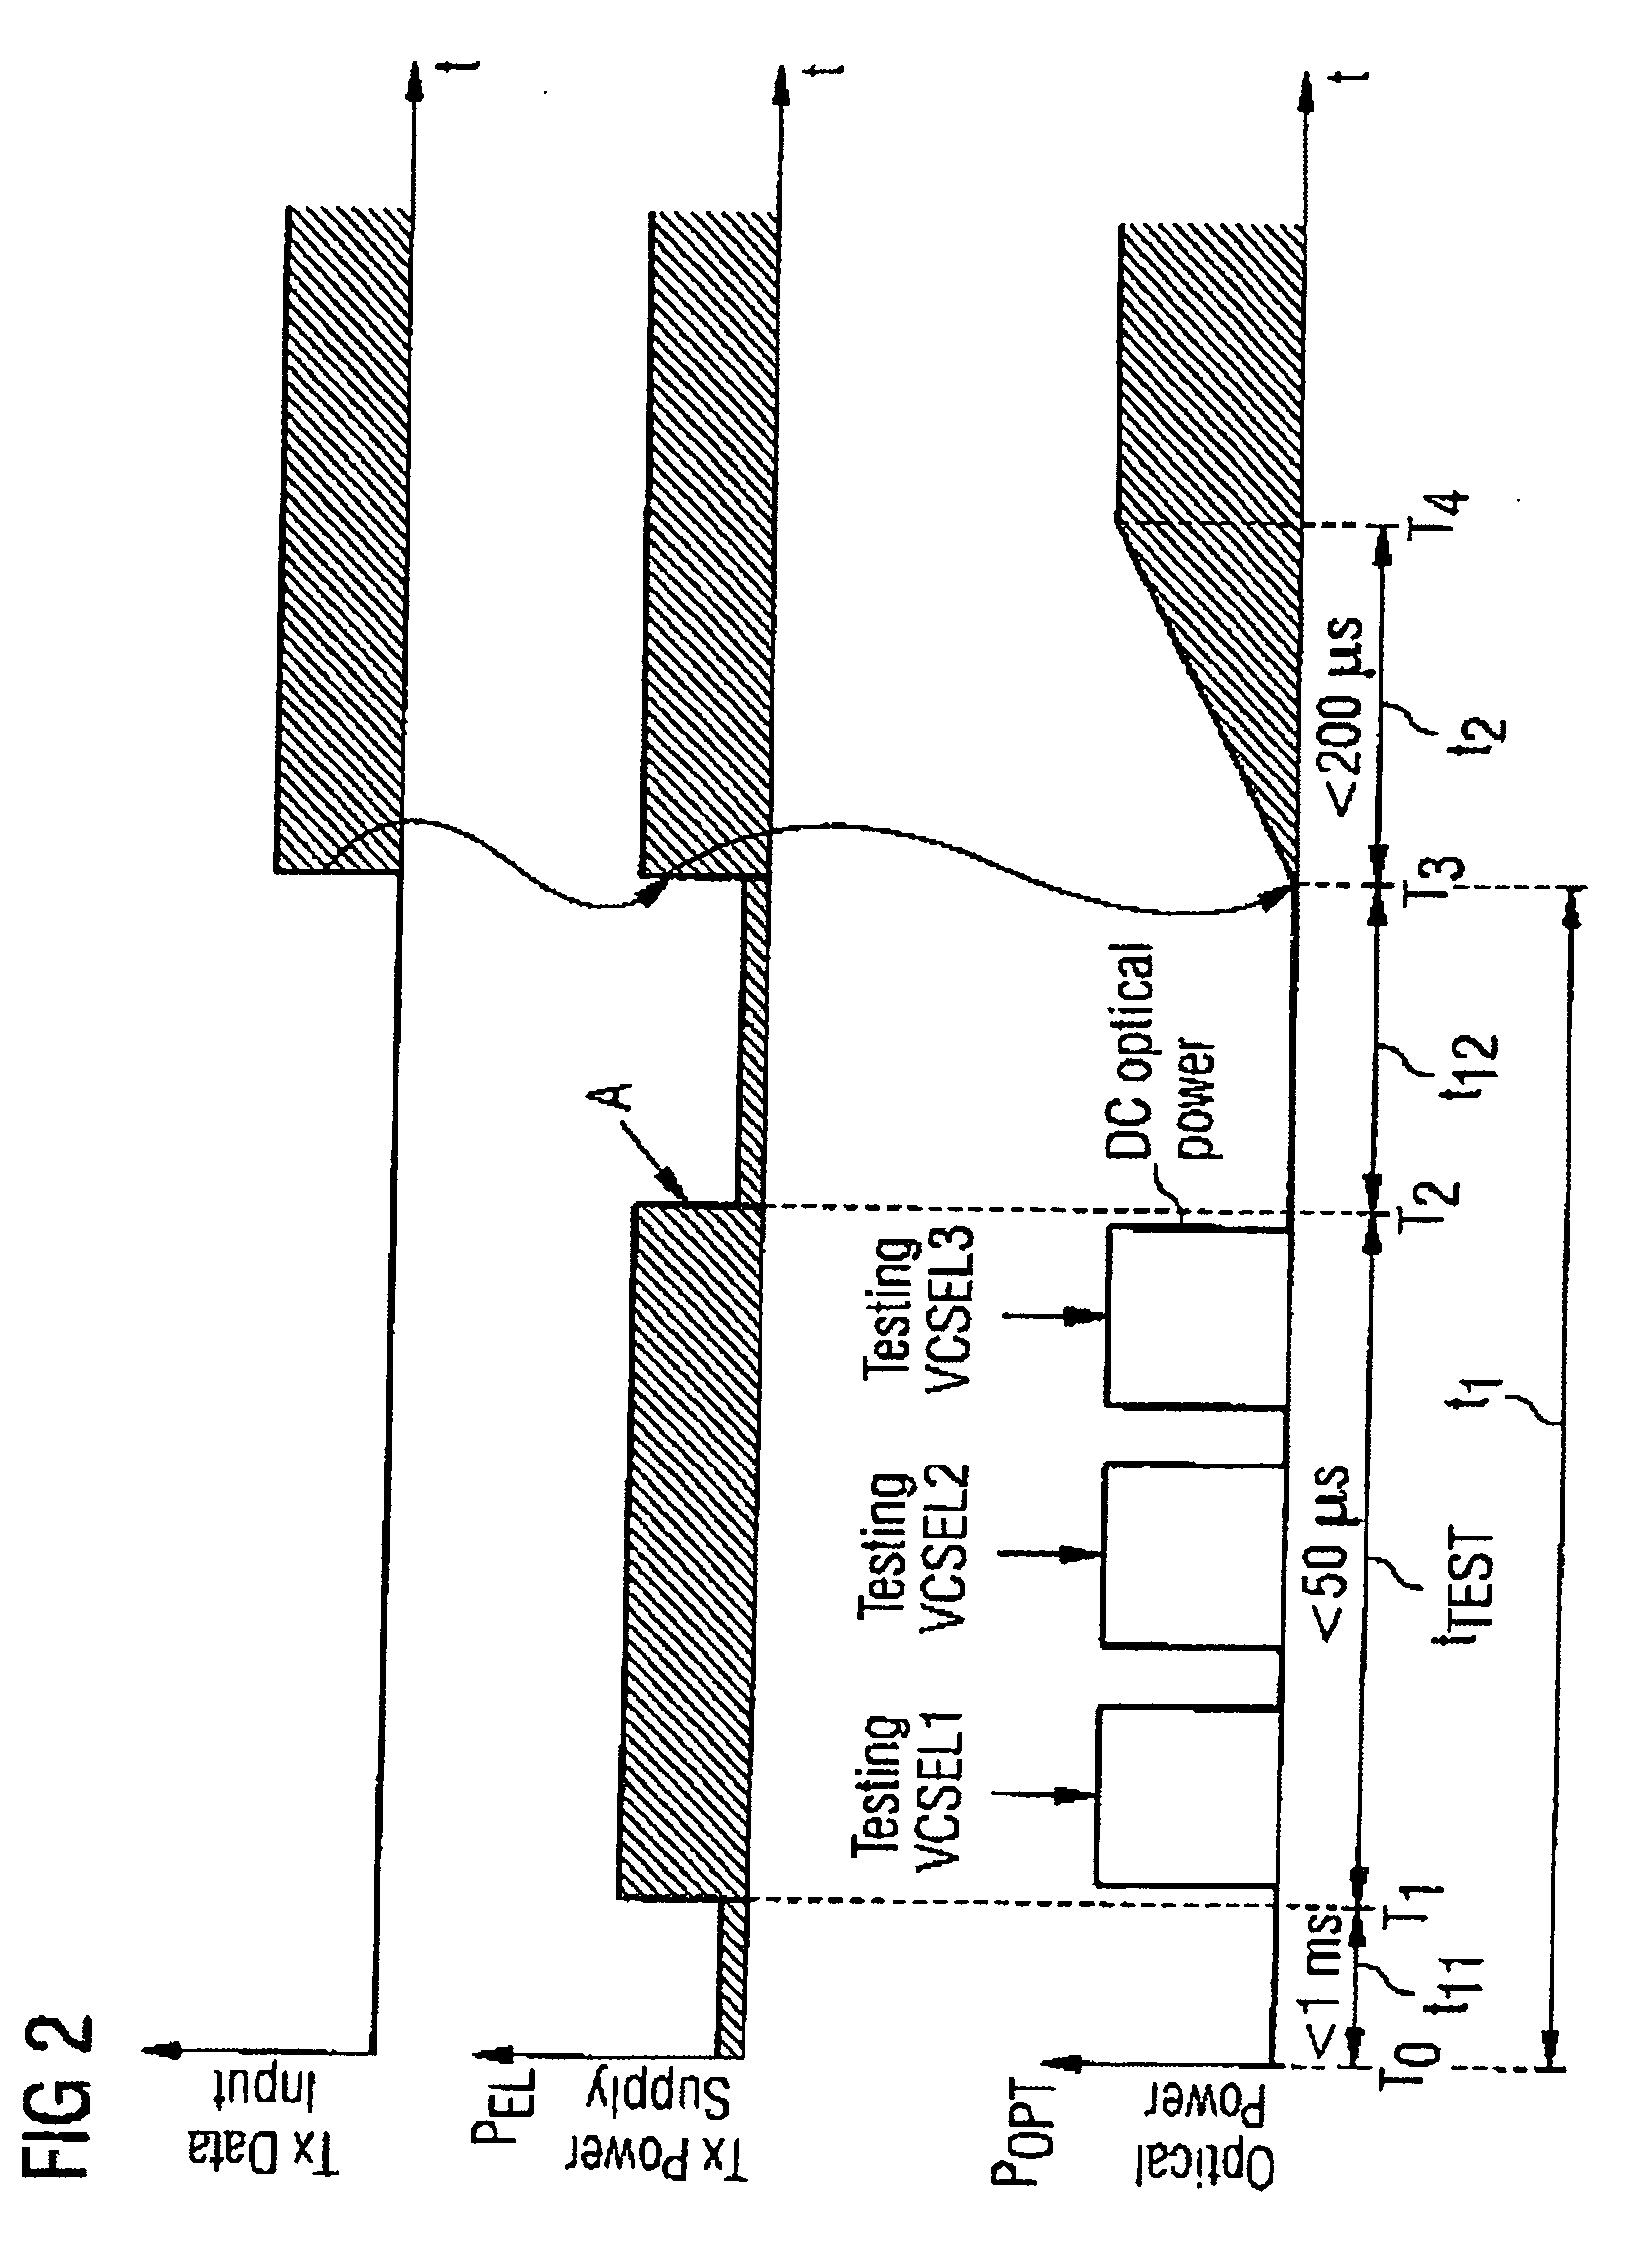 Method and device for operating an optical transmitting device having a plurality of optical transmitters that can be driven independently